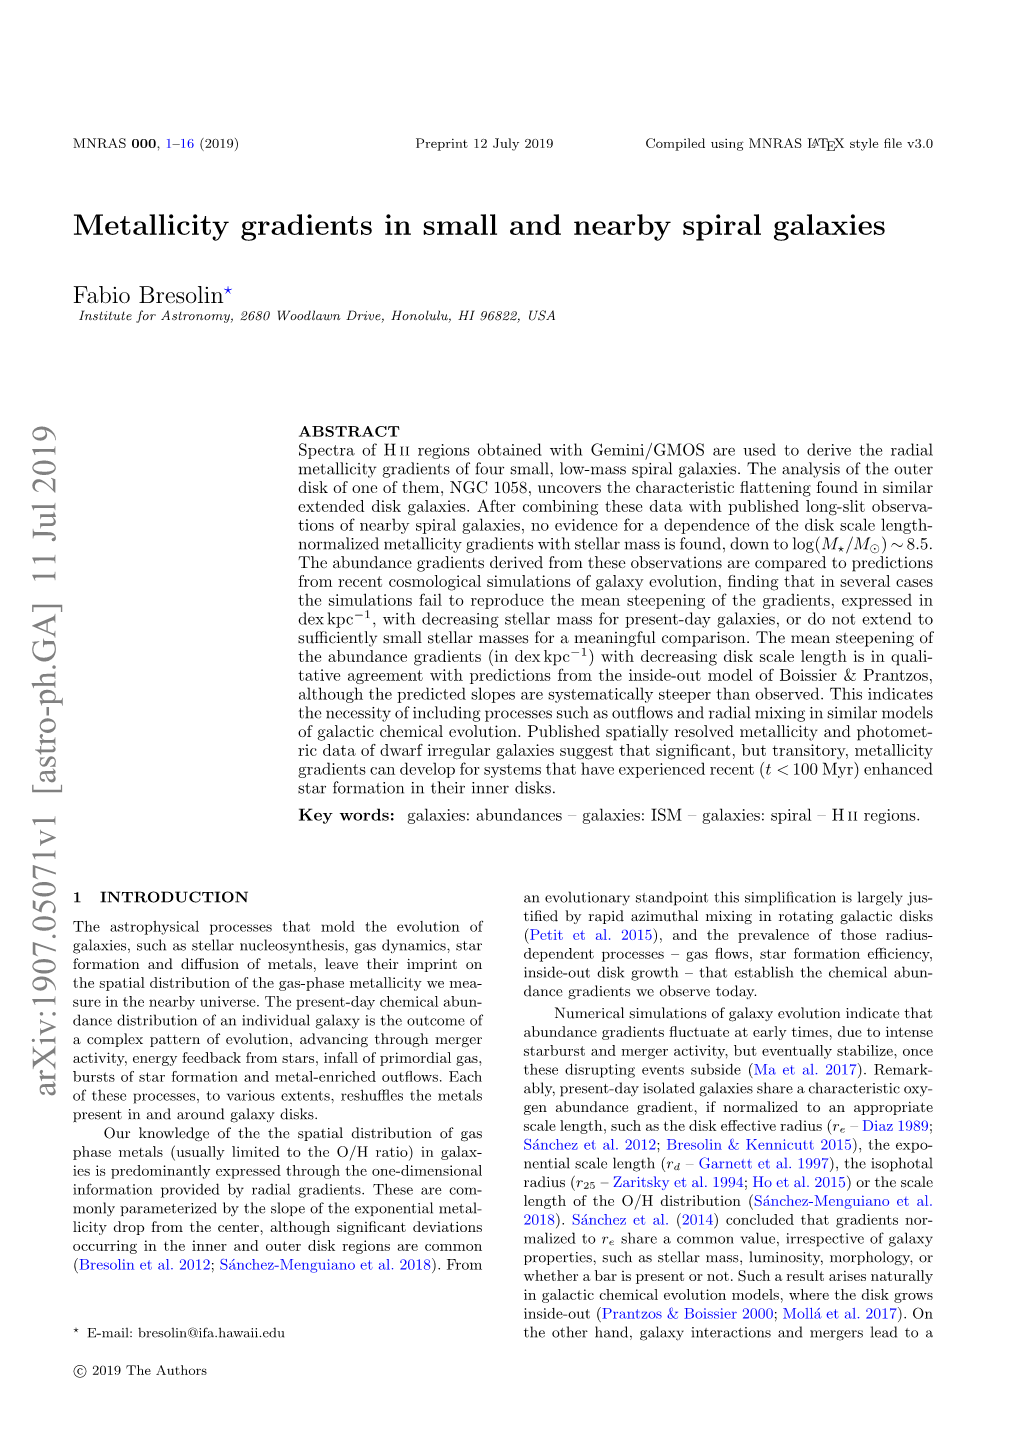 Metallicity Gradients in Small and Nearby Spiral Galaxies